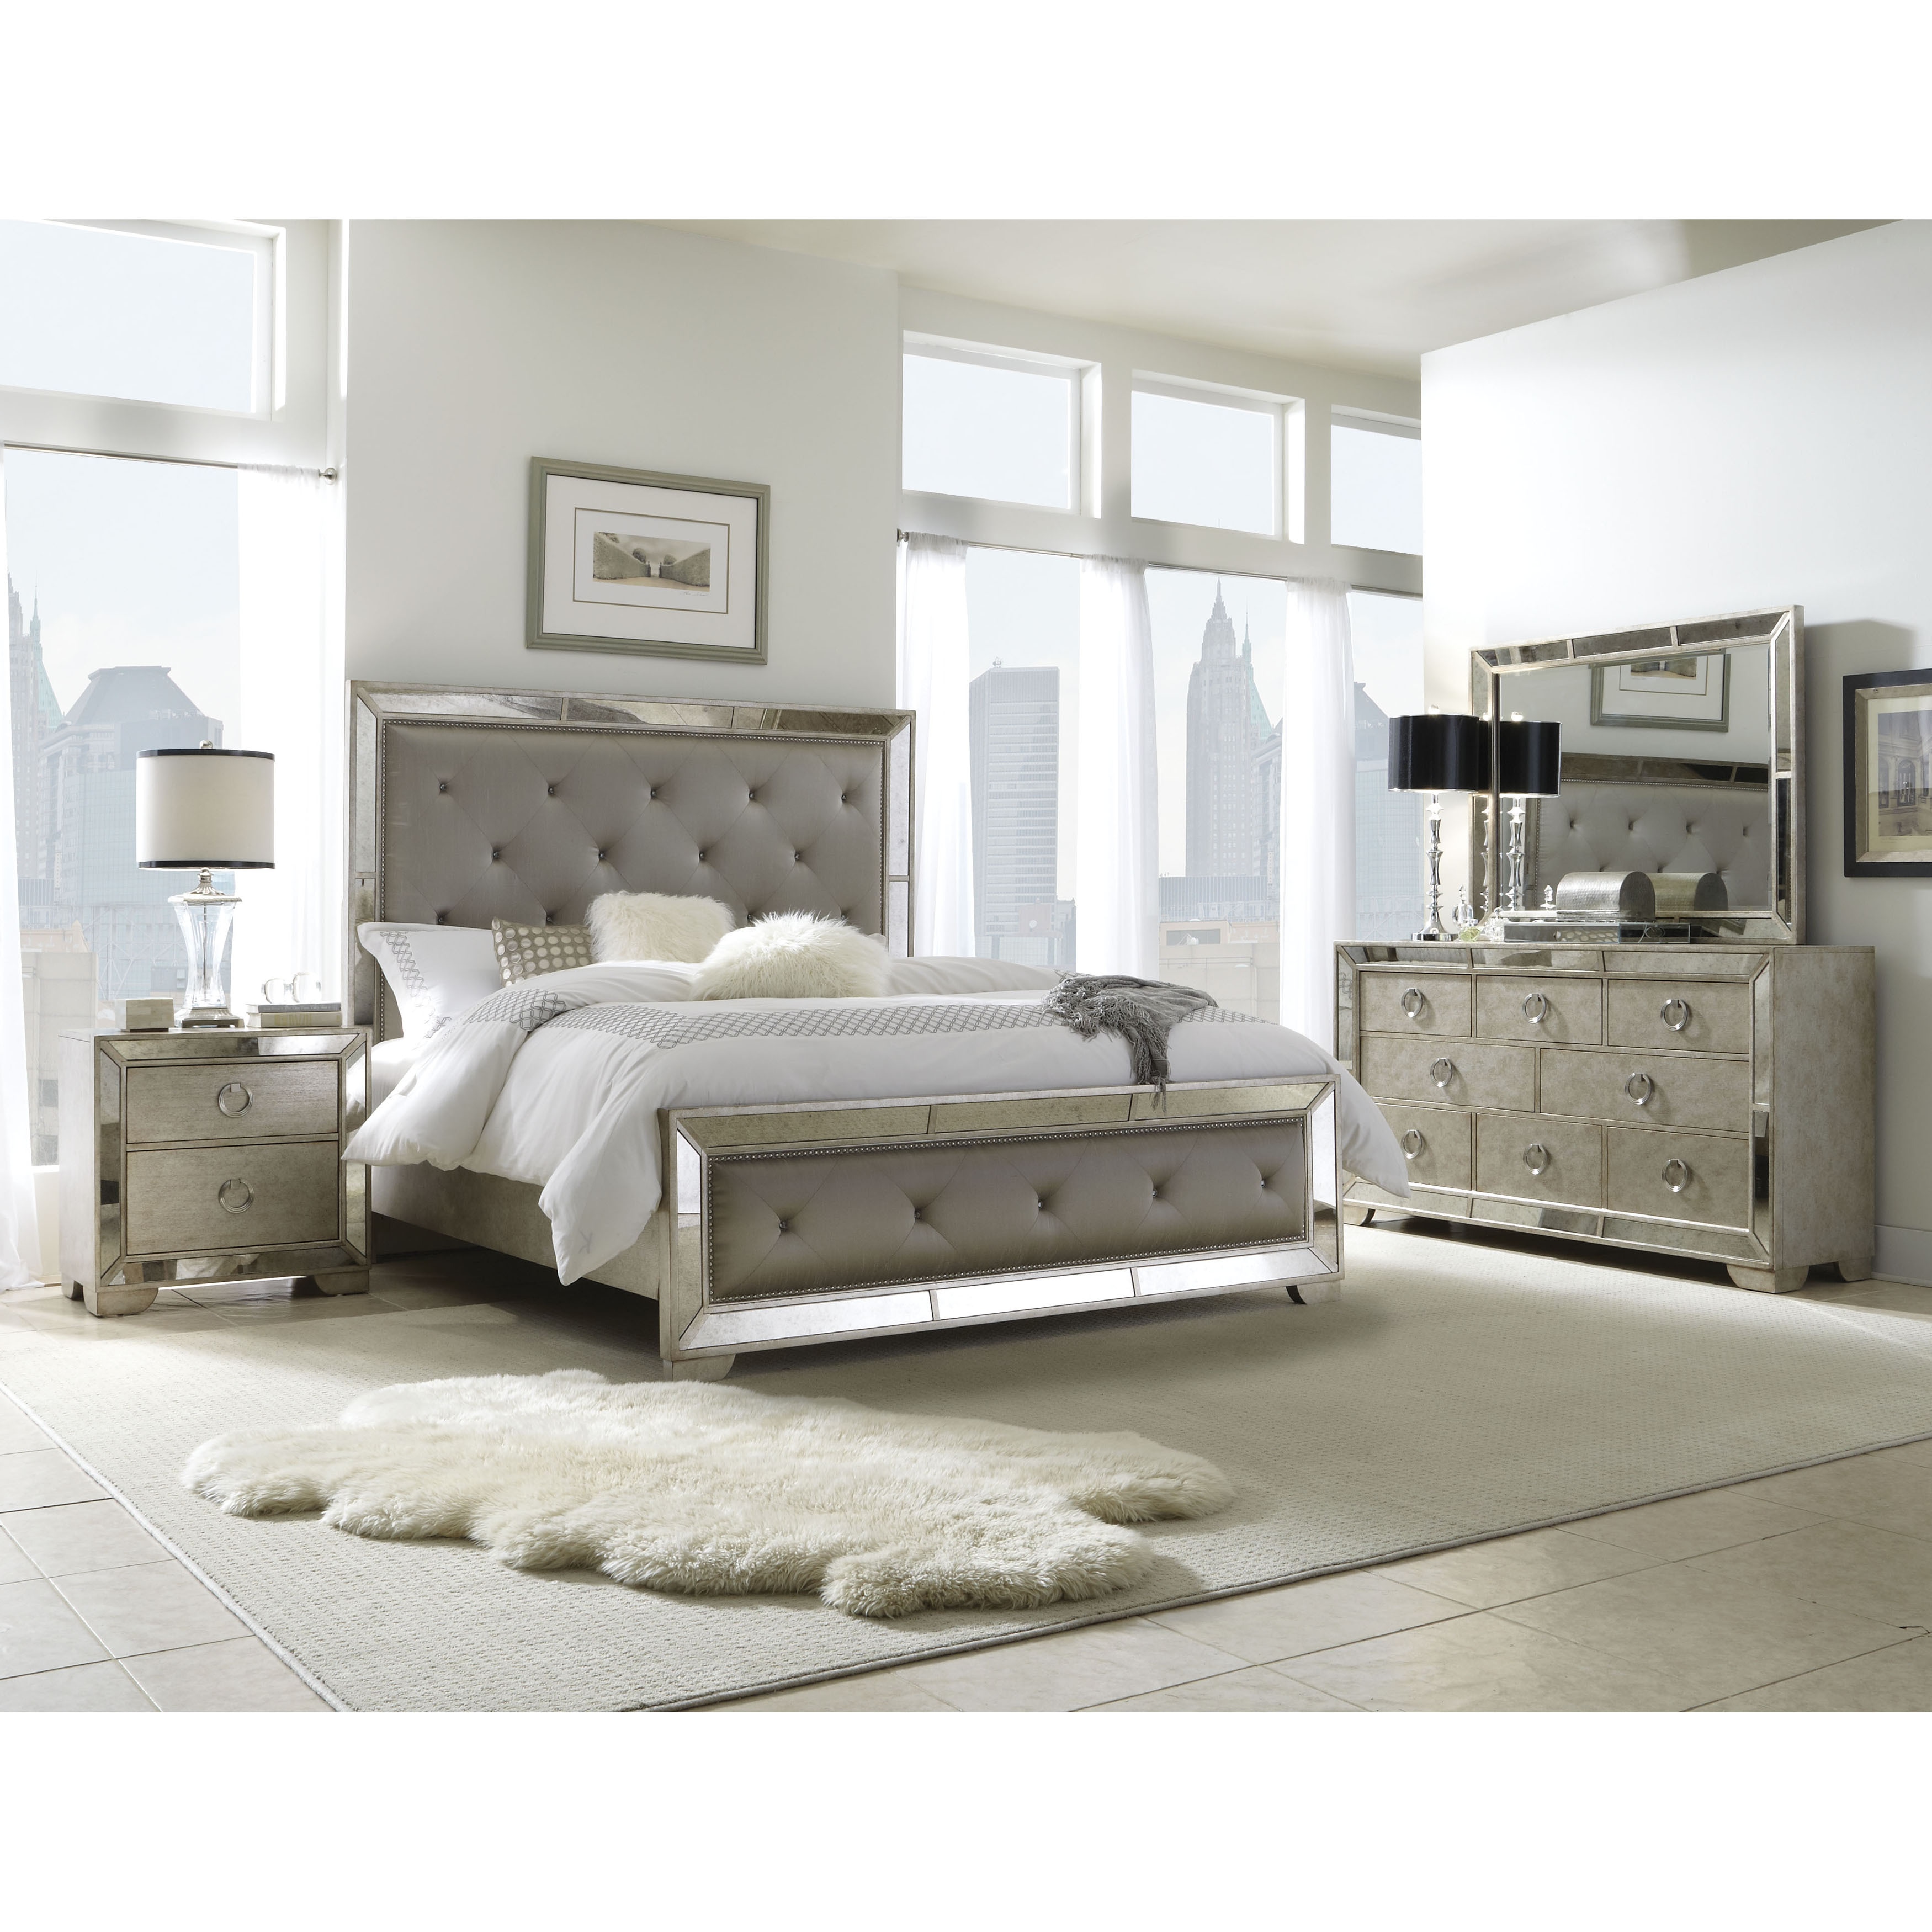 Celine 6 Piece Mirrored And Upholstered Tufted Queen Size Bedroom Set